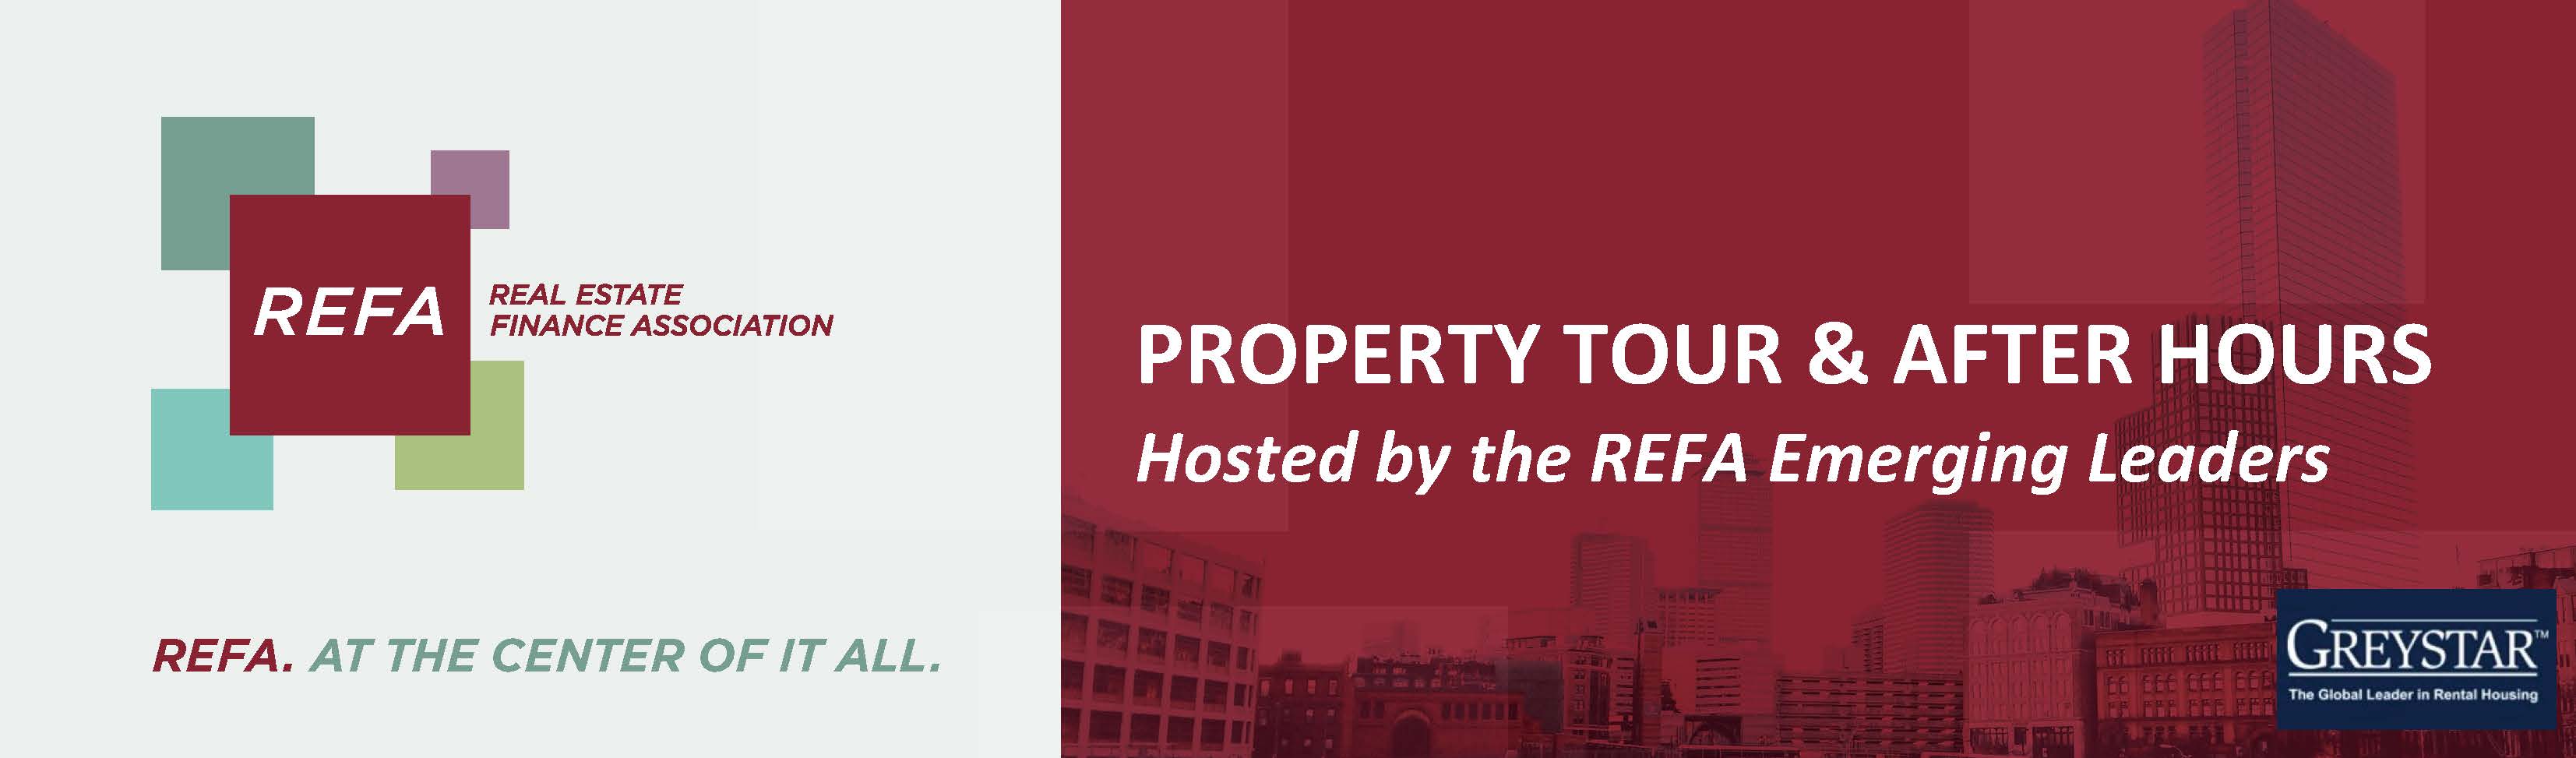 REFA Emerging Leaders Property Tour & After Hours